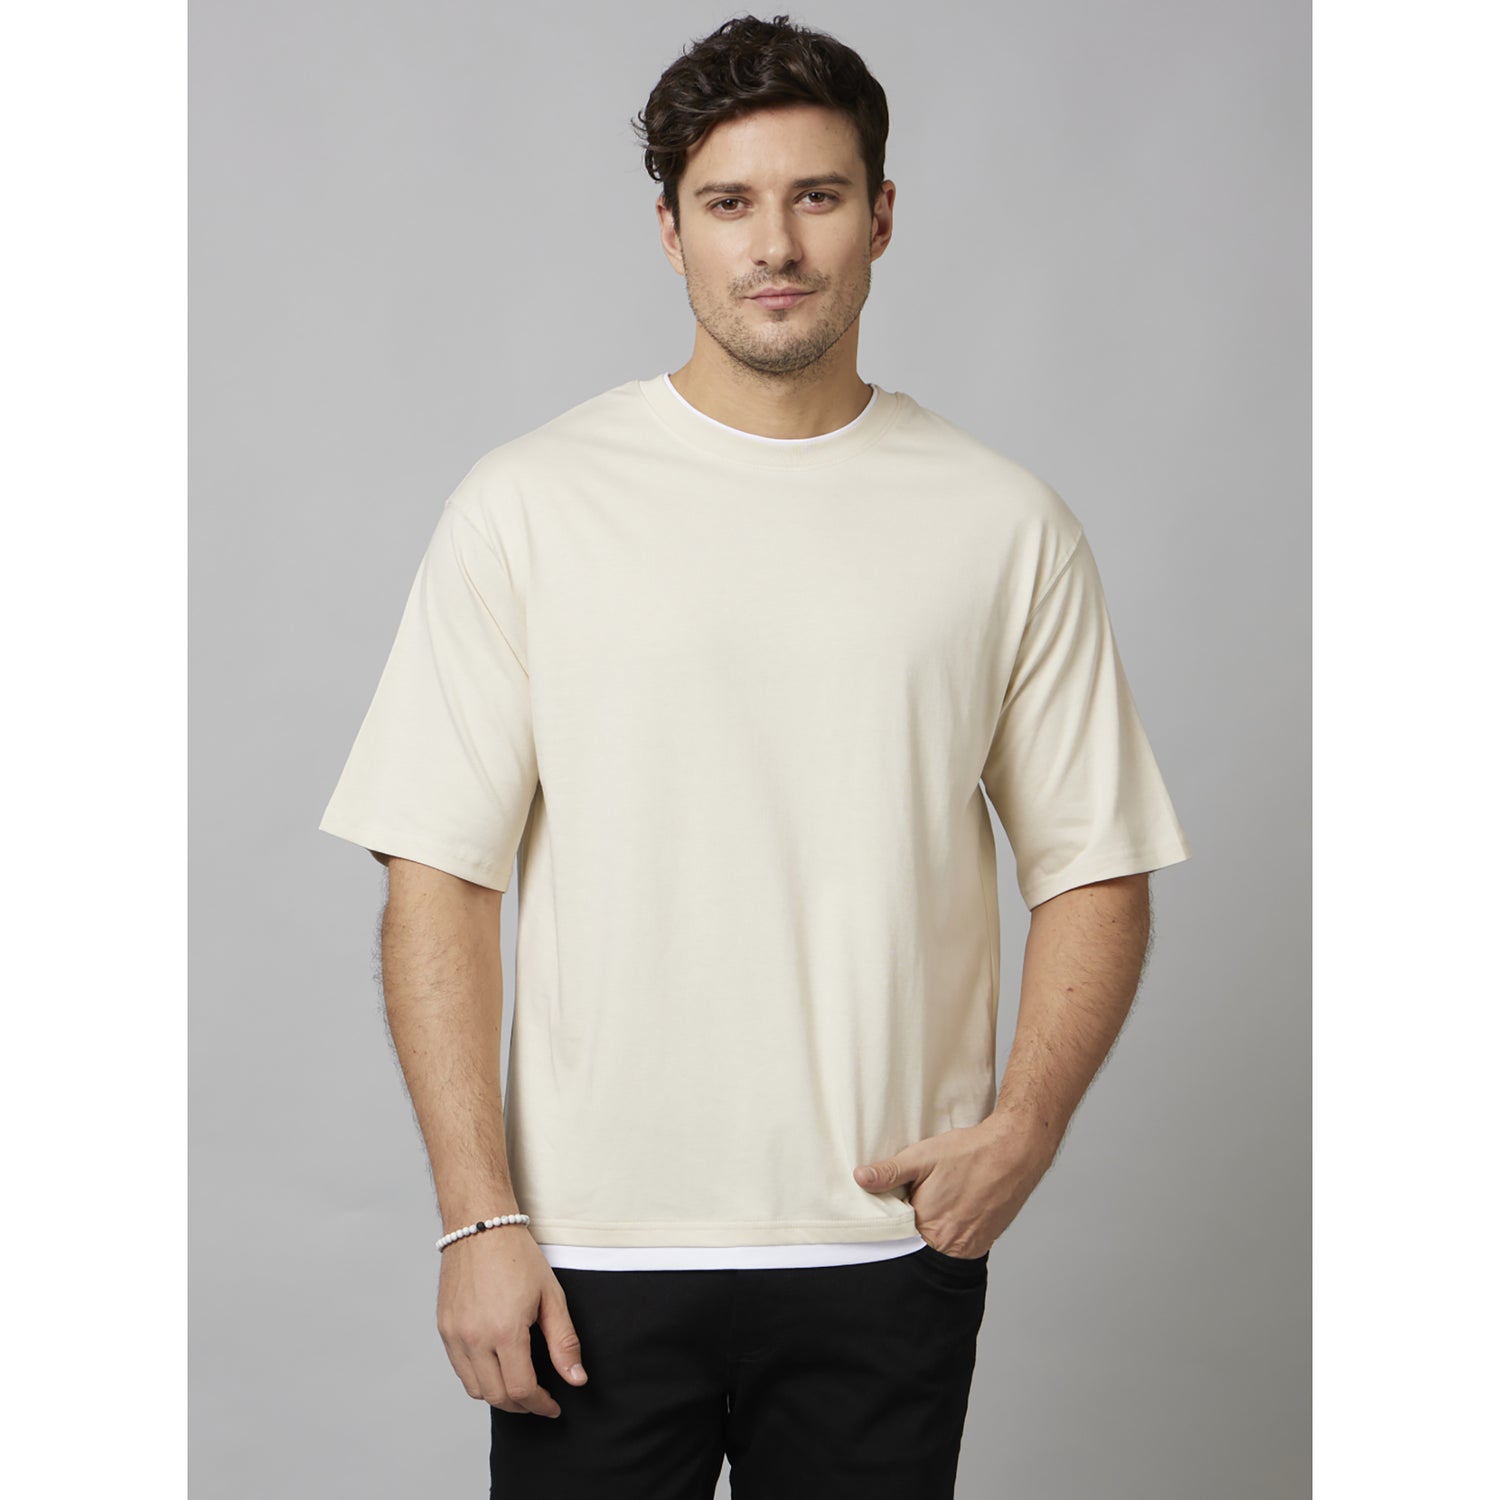 Beige Solid Half Sleeve Cotton T-Shirts (FETWIN)